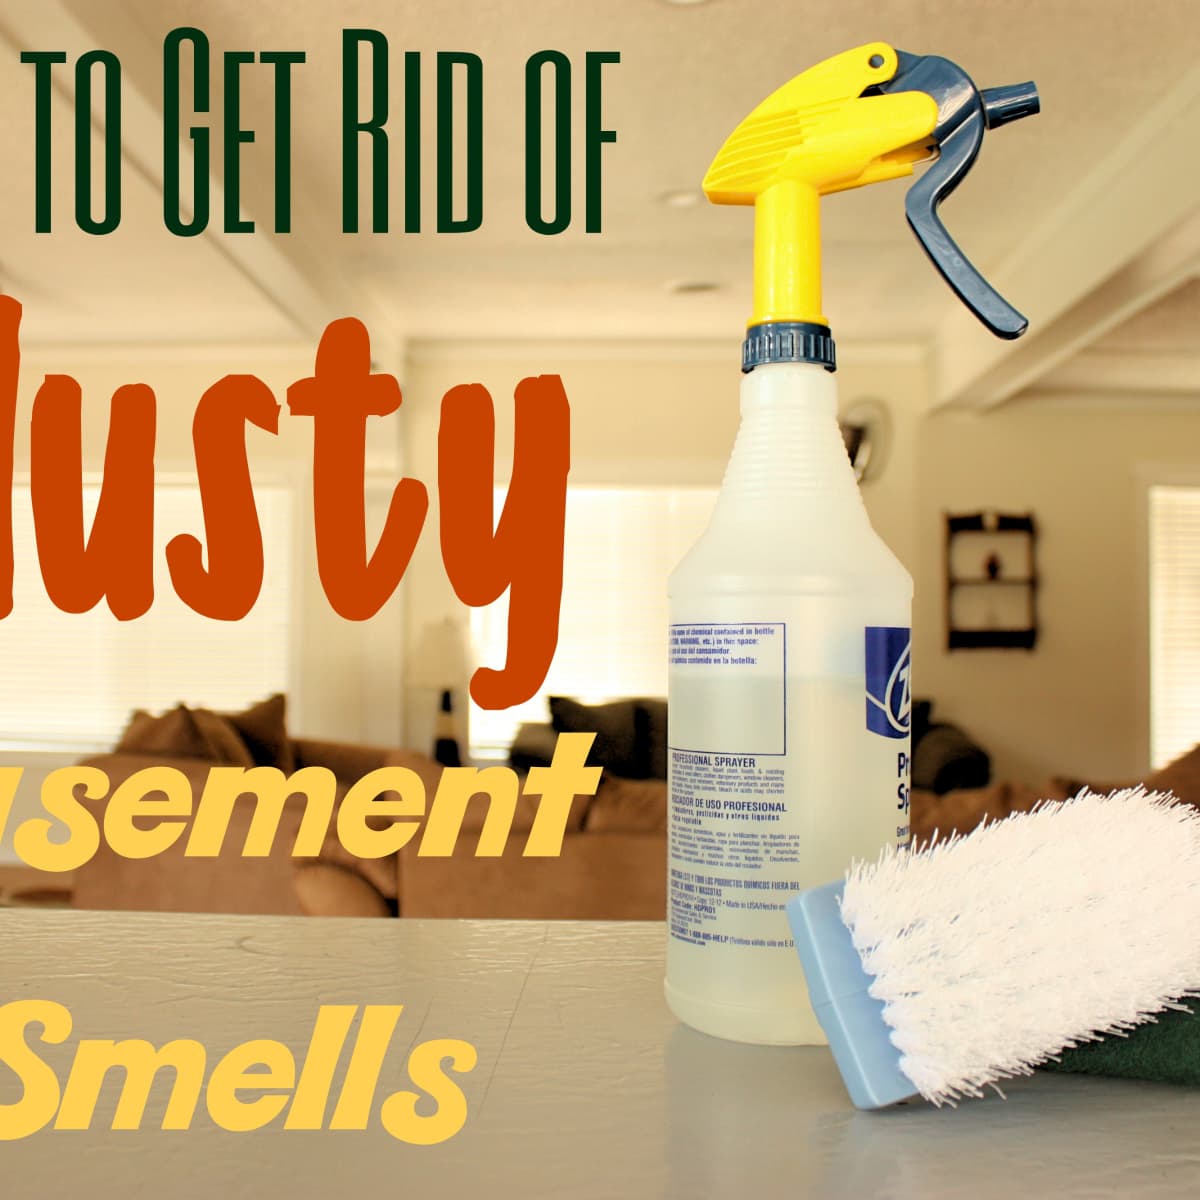 How To Remove Musty Smell From Paper How to Get Rid of Musty Basement Smells (Plus Prevention Tips) - Dengarden